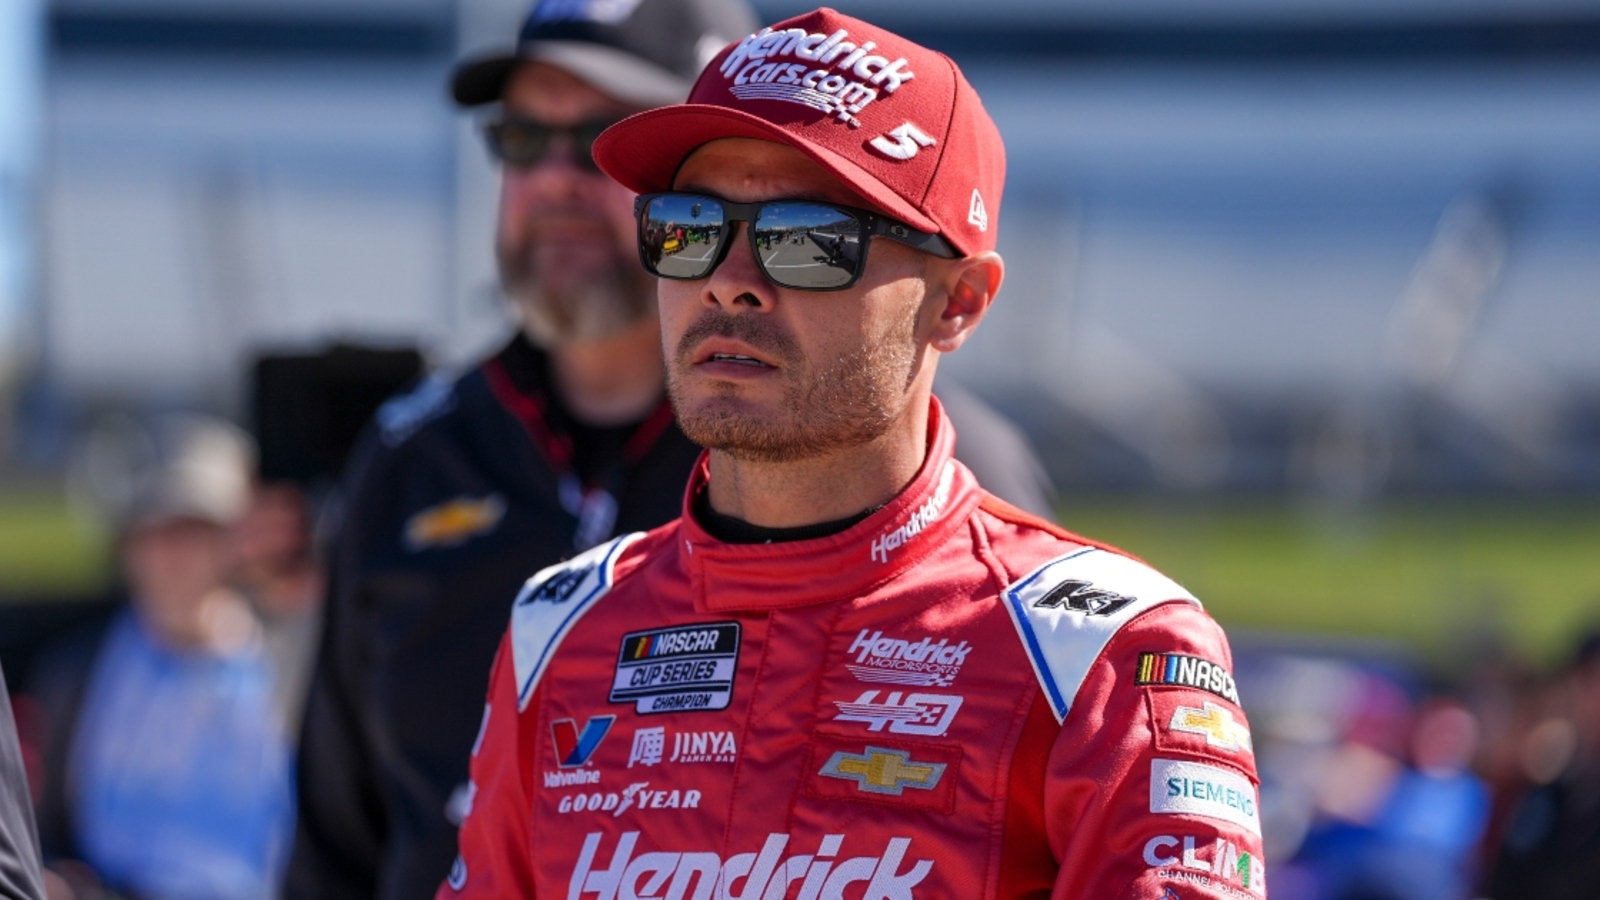 Kyle Larson lands in helicopter at North Wilkesboro Speedway